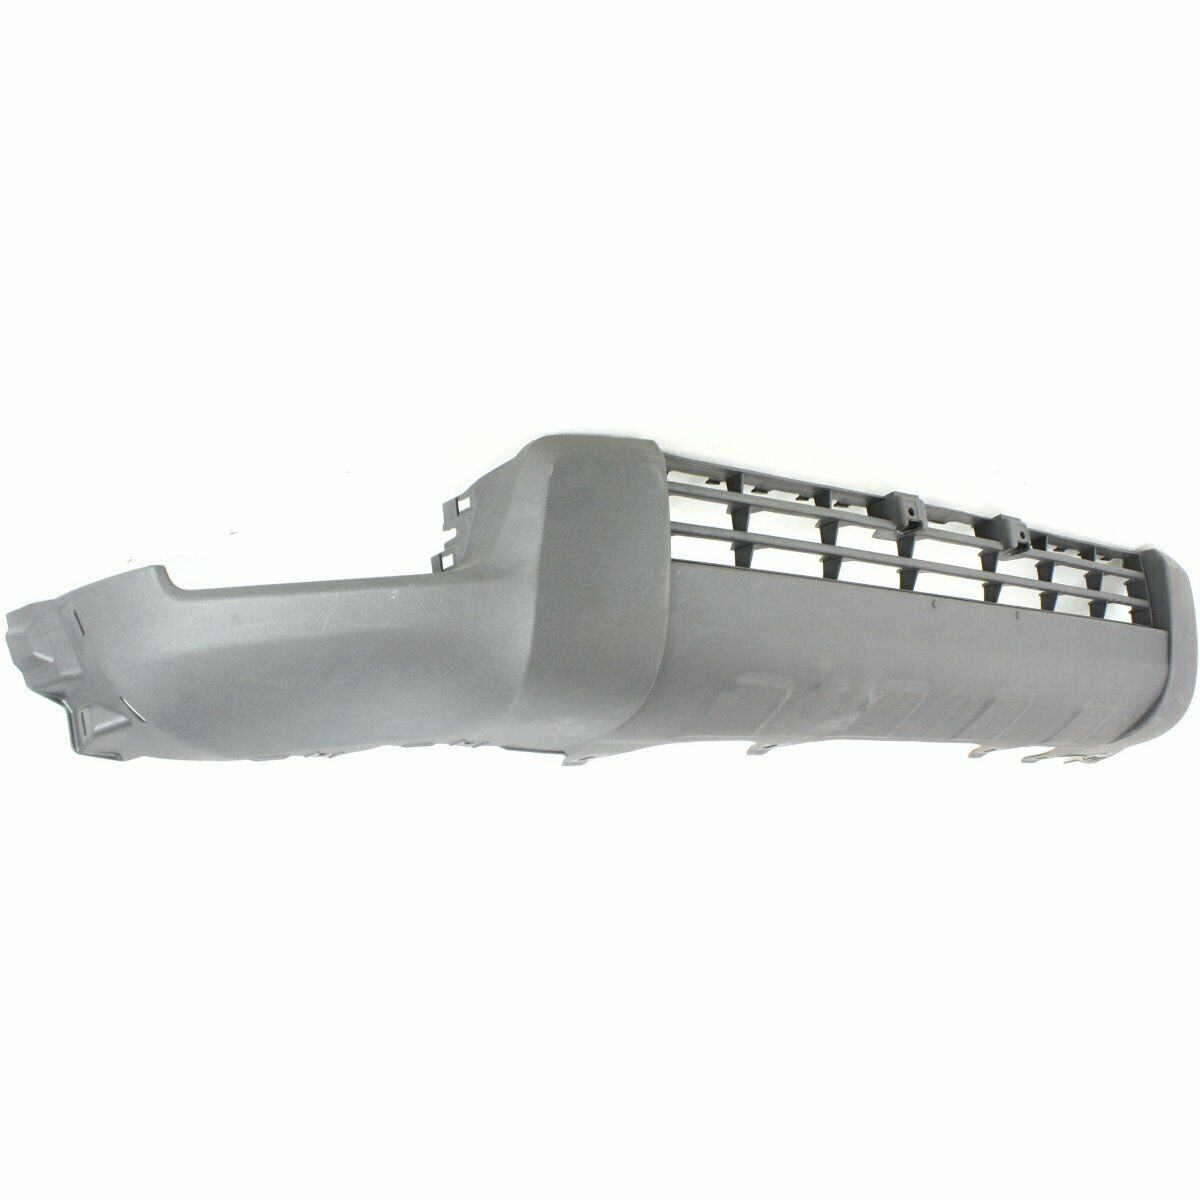 2003-2005 Toyota 4Runner (SR5) Front Bumper Painted to Match